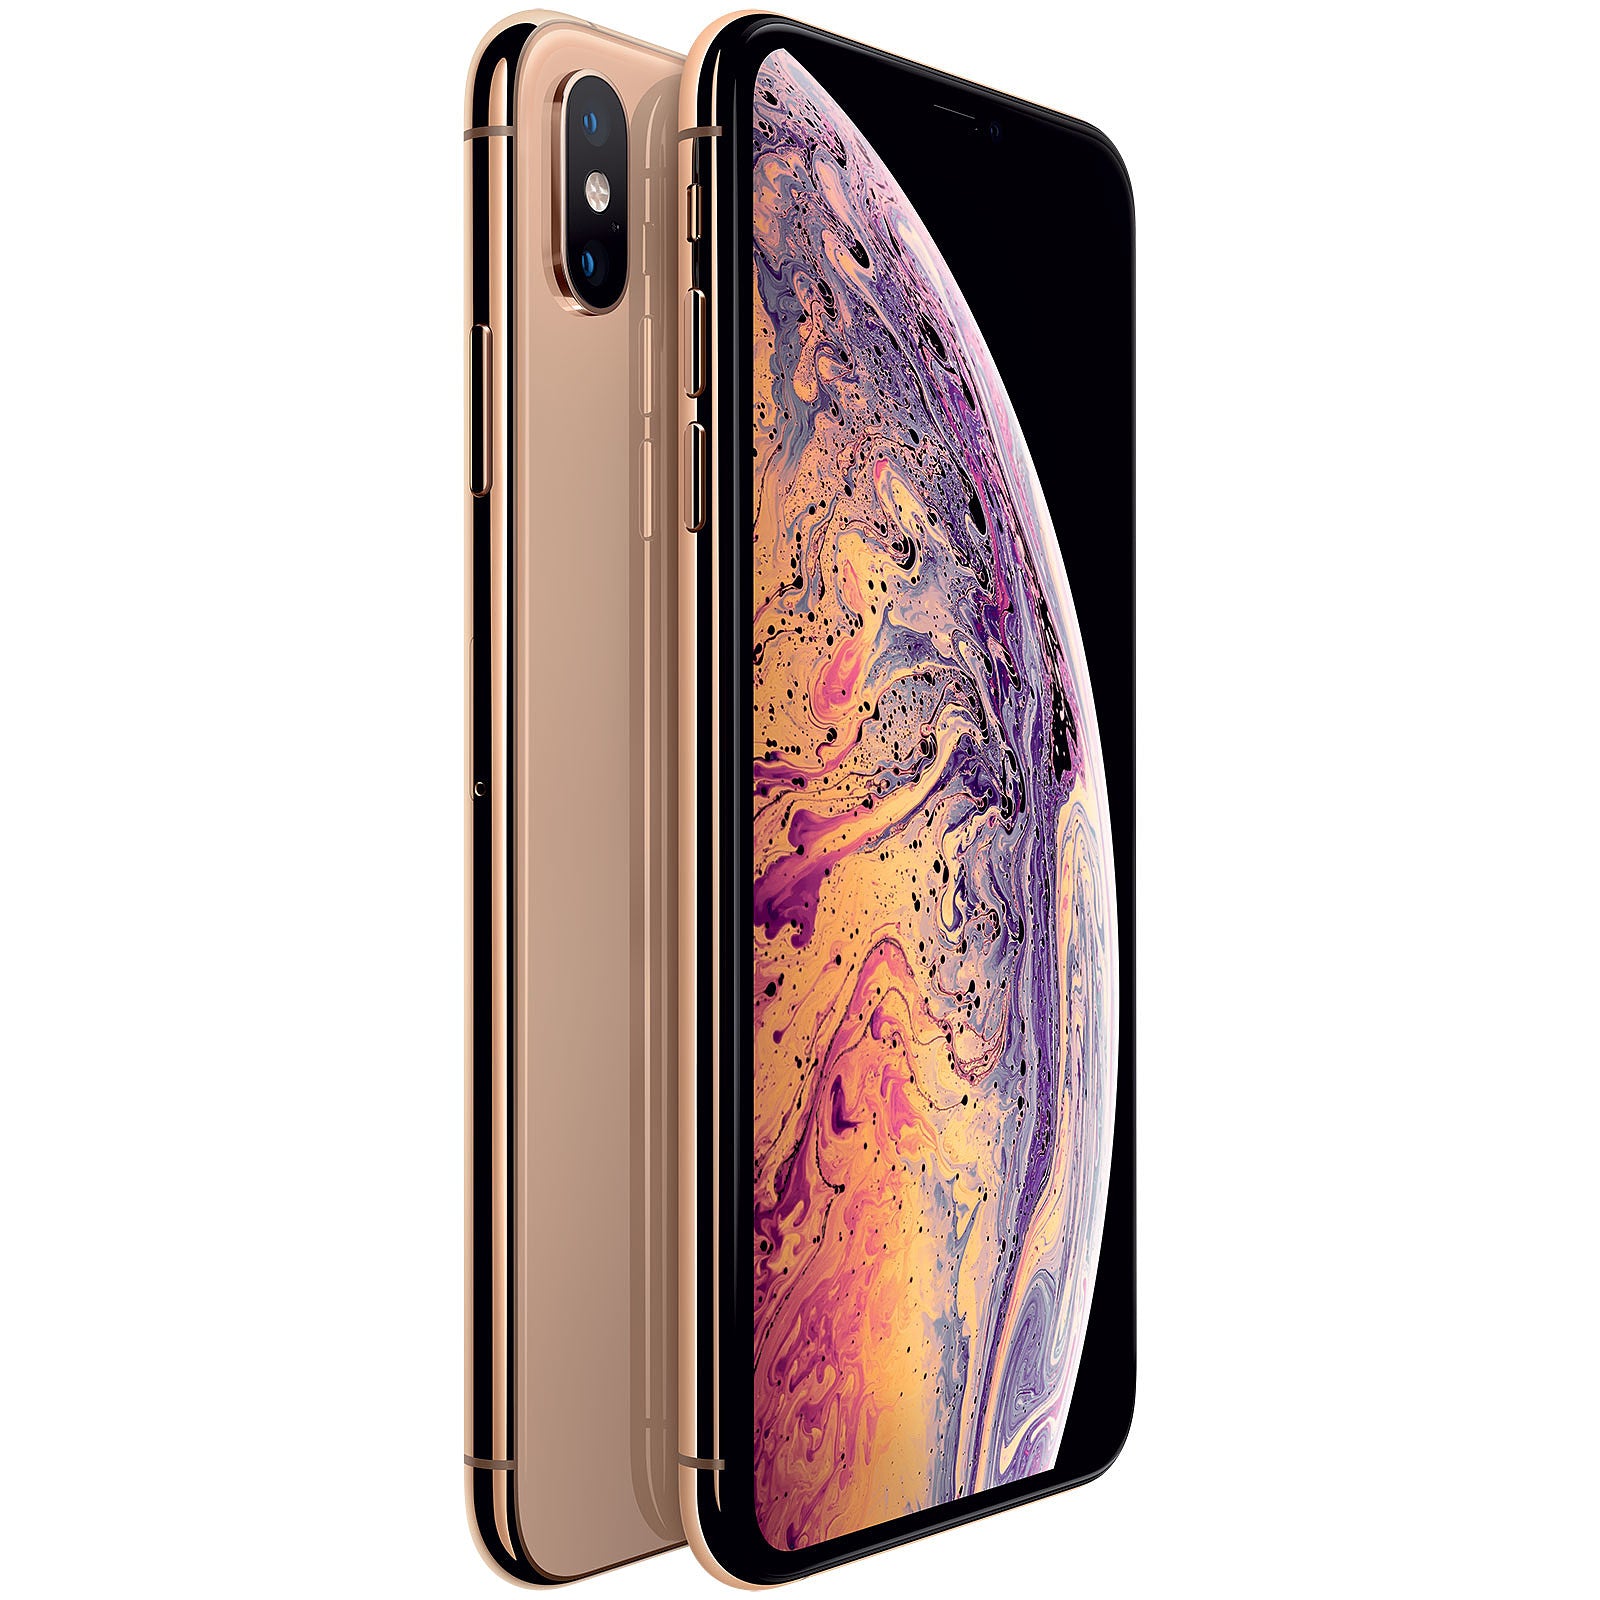 iPhone XS 512GB Silver - From €339,00 - Swappie